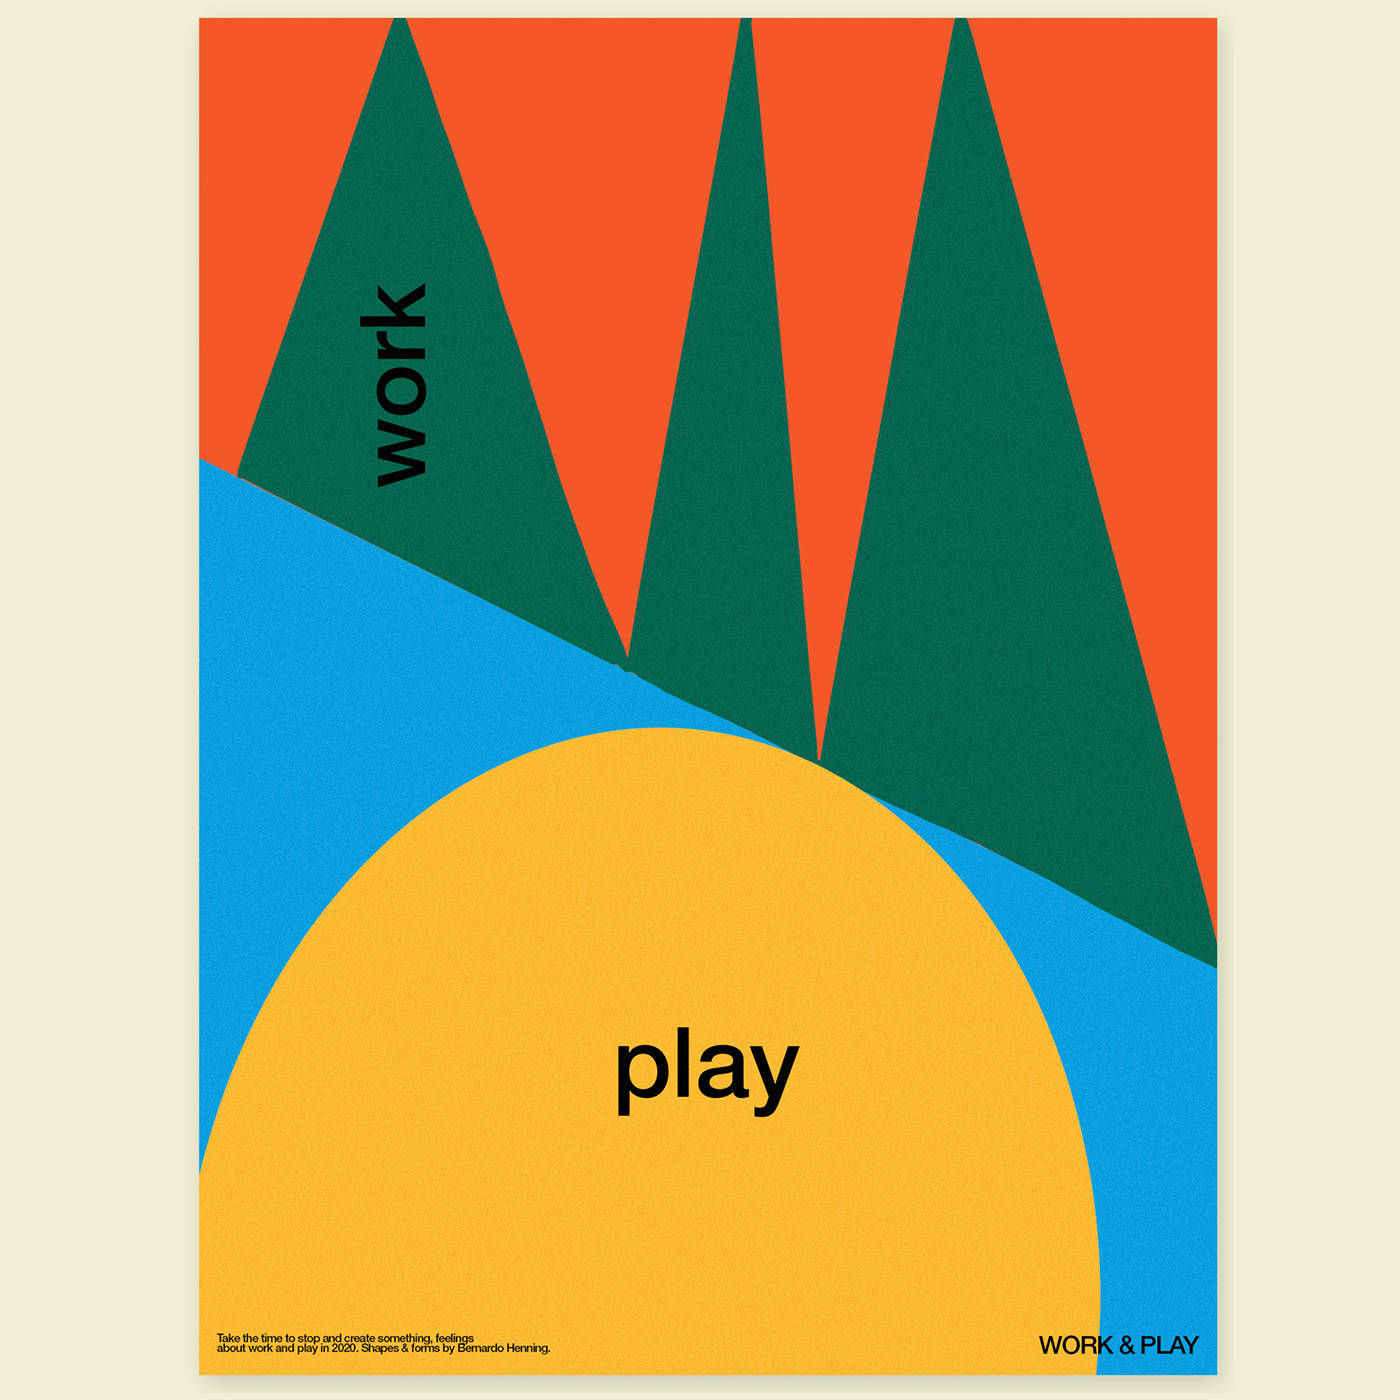 bernardo henning colors helvetica maybe minimalist posters shapes simple tipography Work 